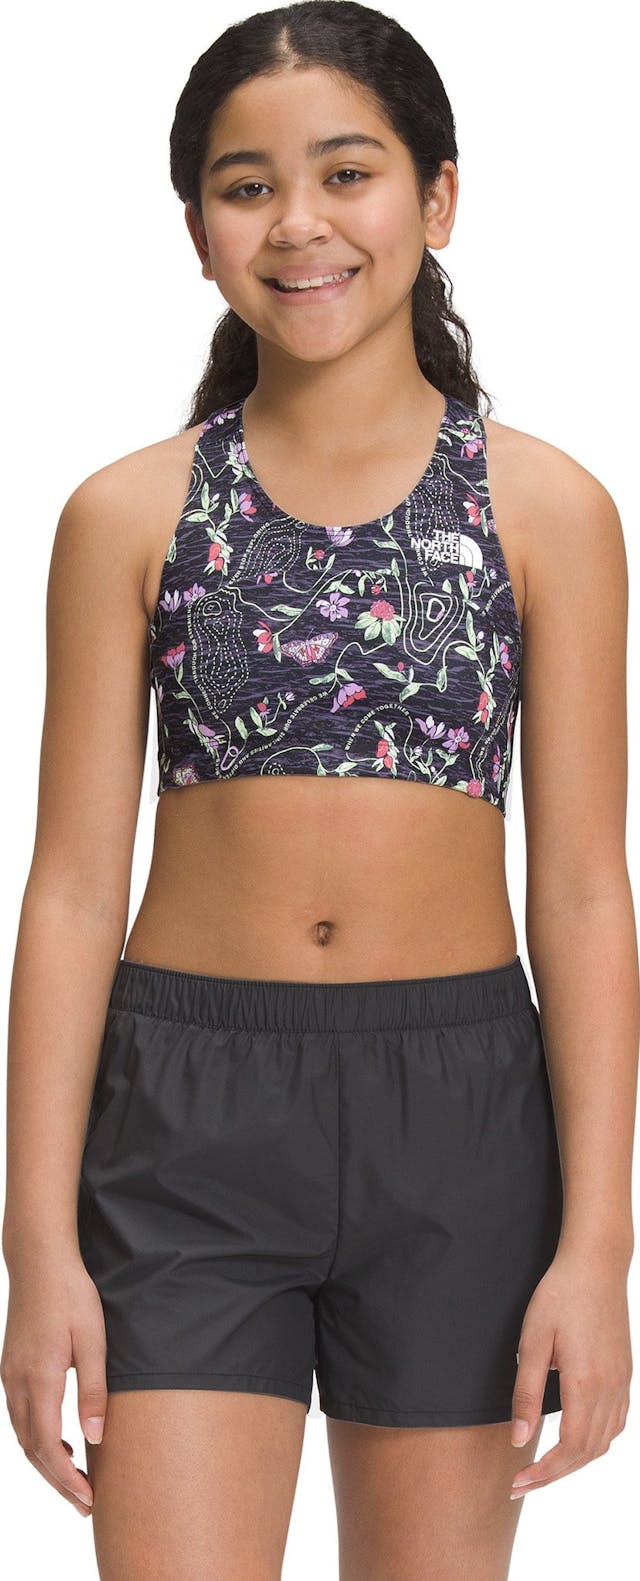 Product image for Never Stop Bralette - Girls